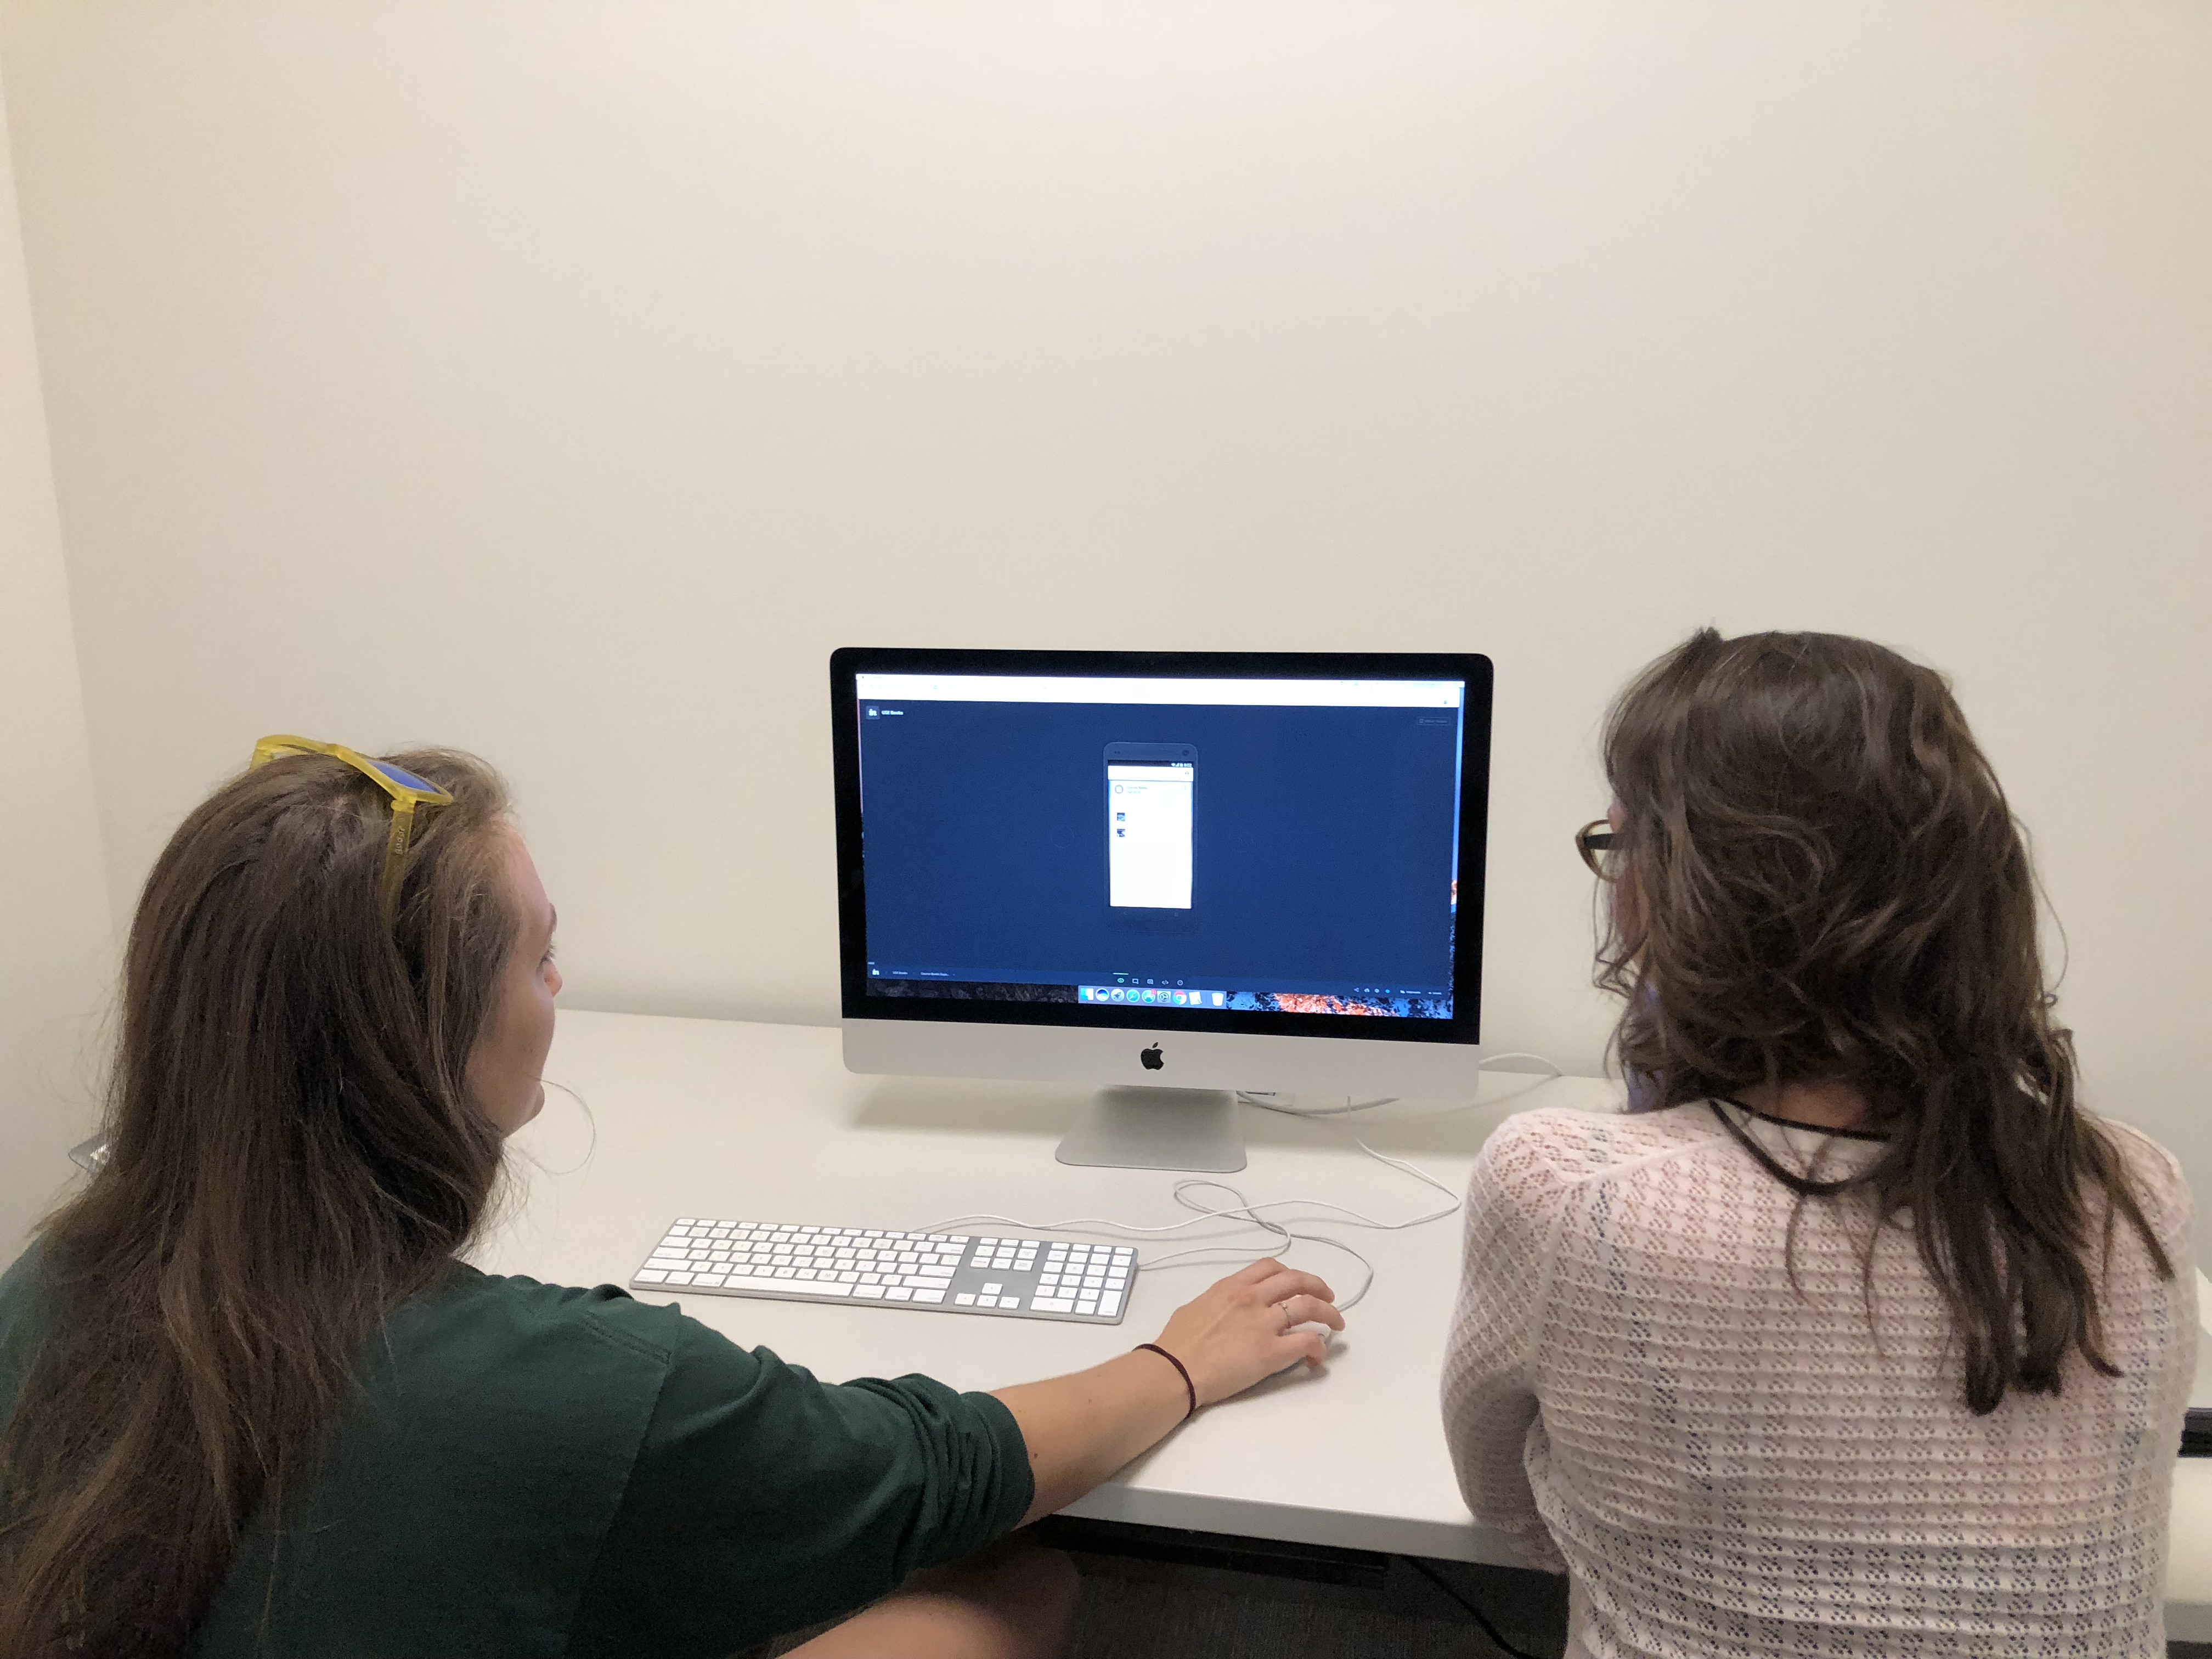 Student and UX researcher examining a design on an iMac computer.